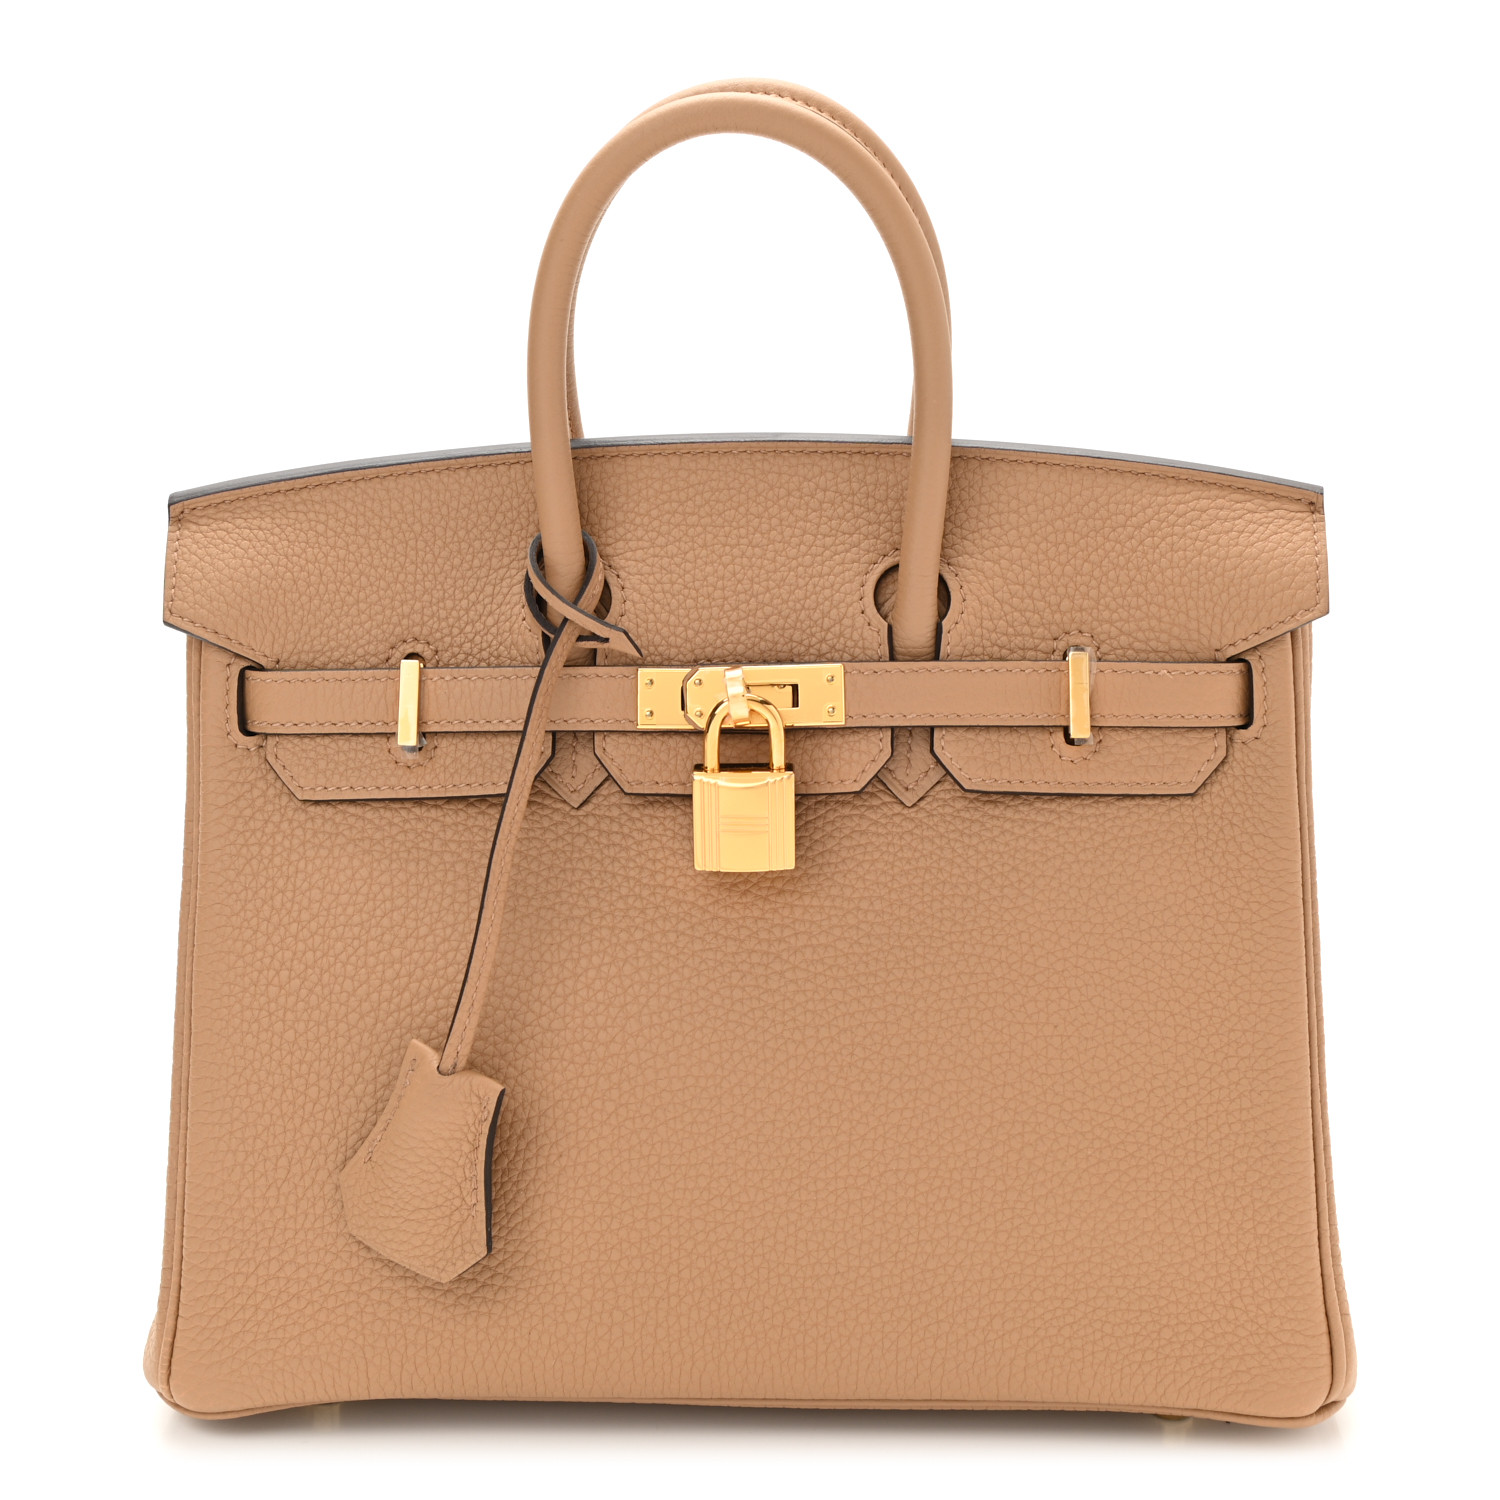 Here's How To Spot The Difference Between Real And Fake Designer Bags ...